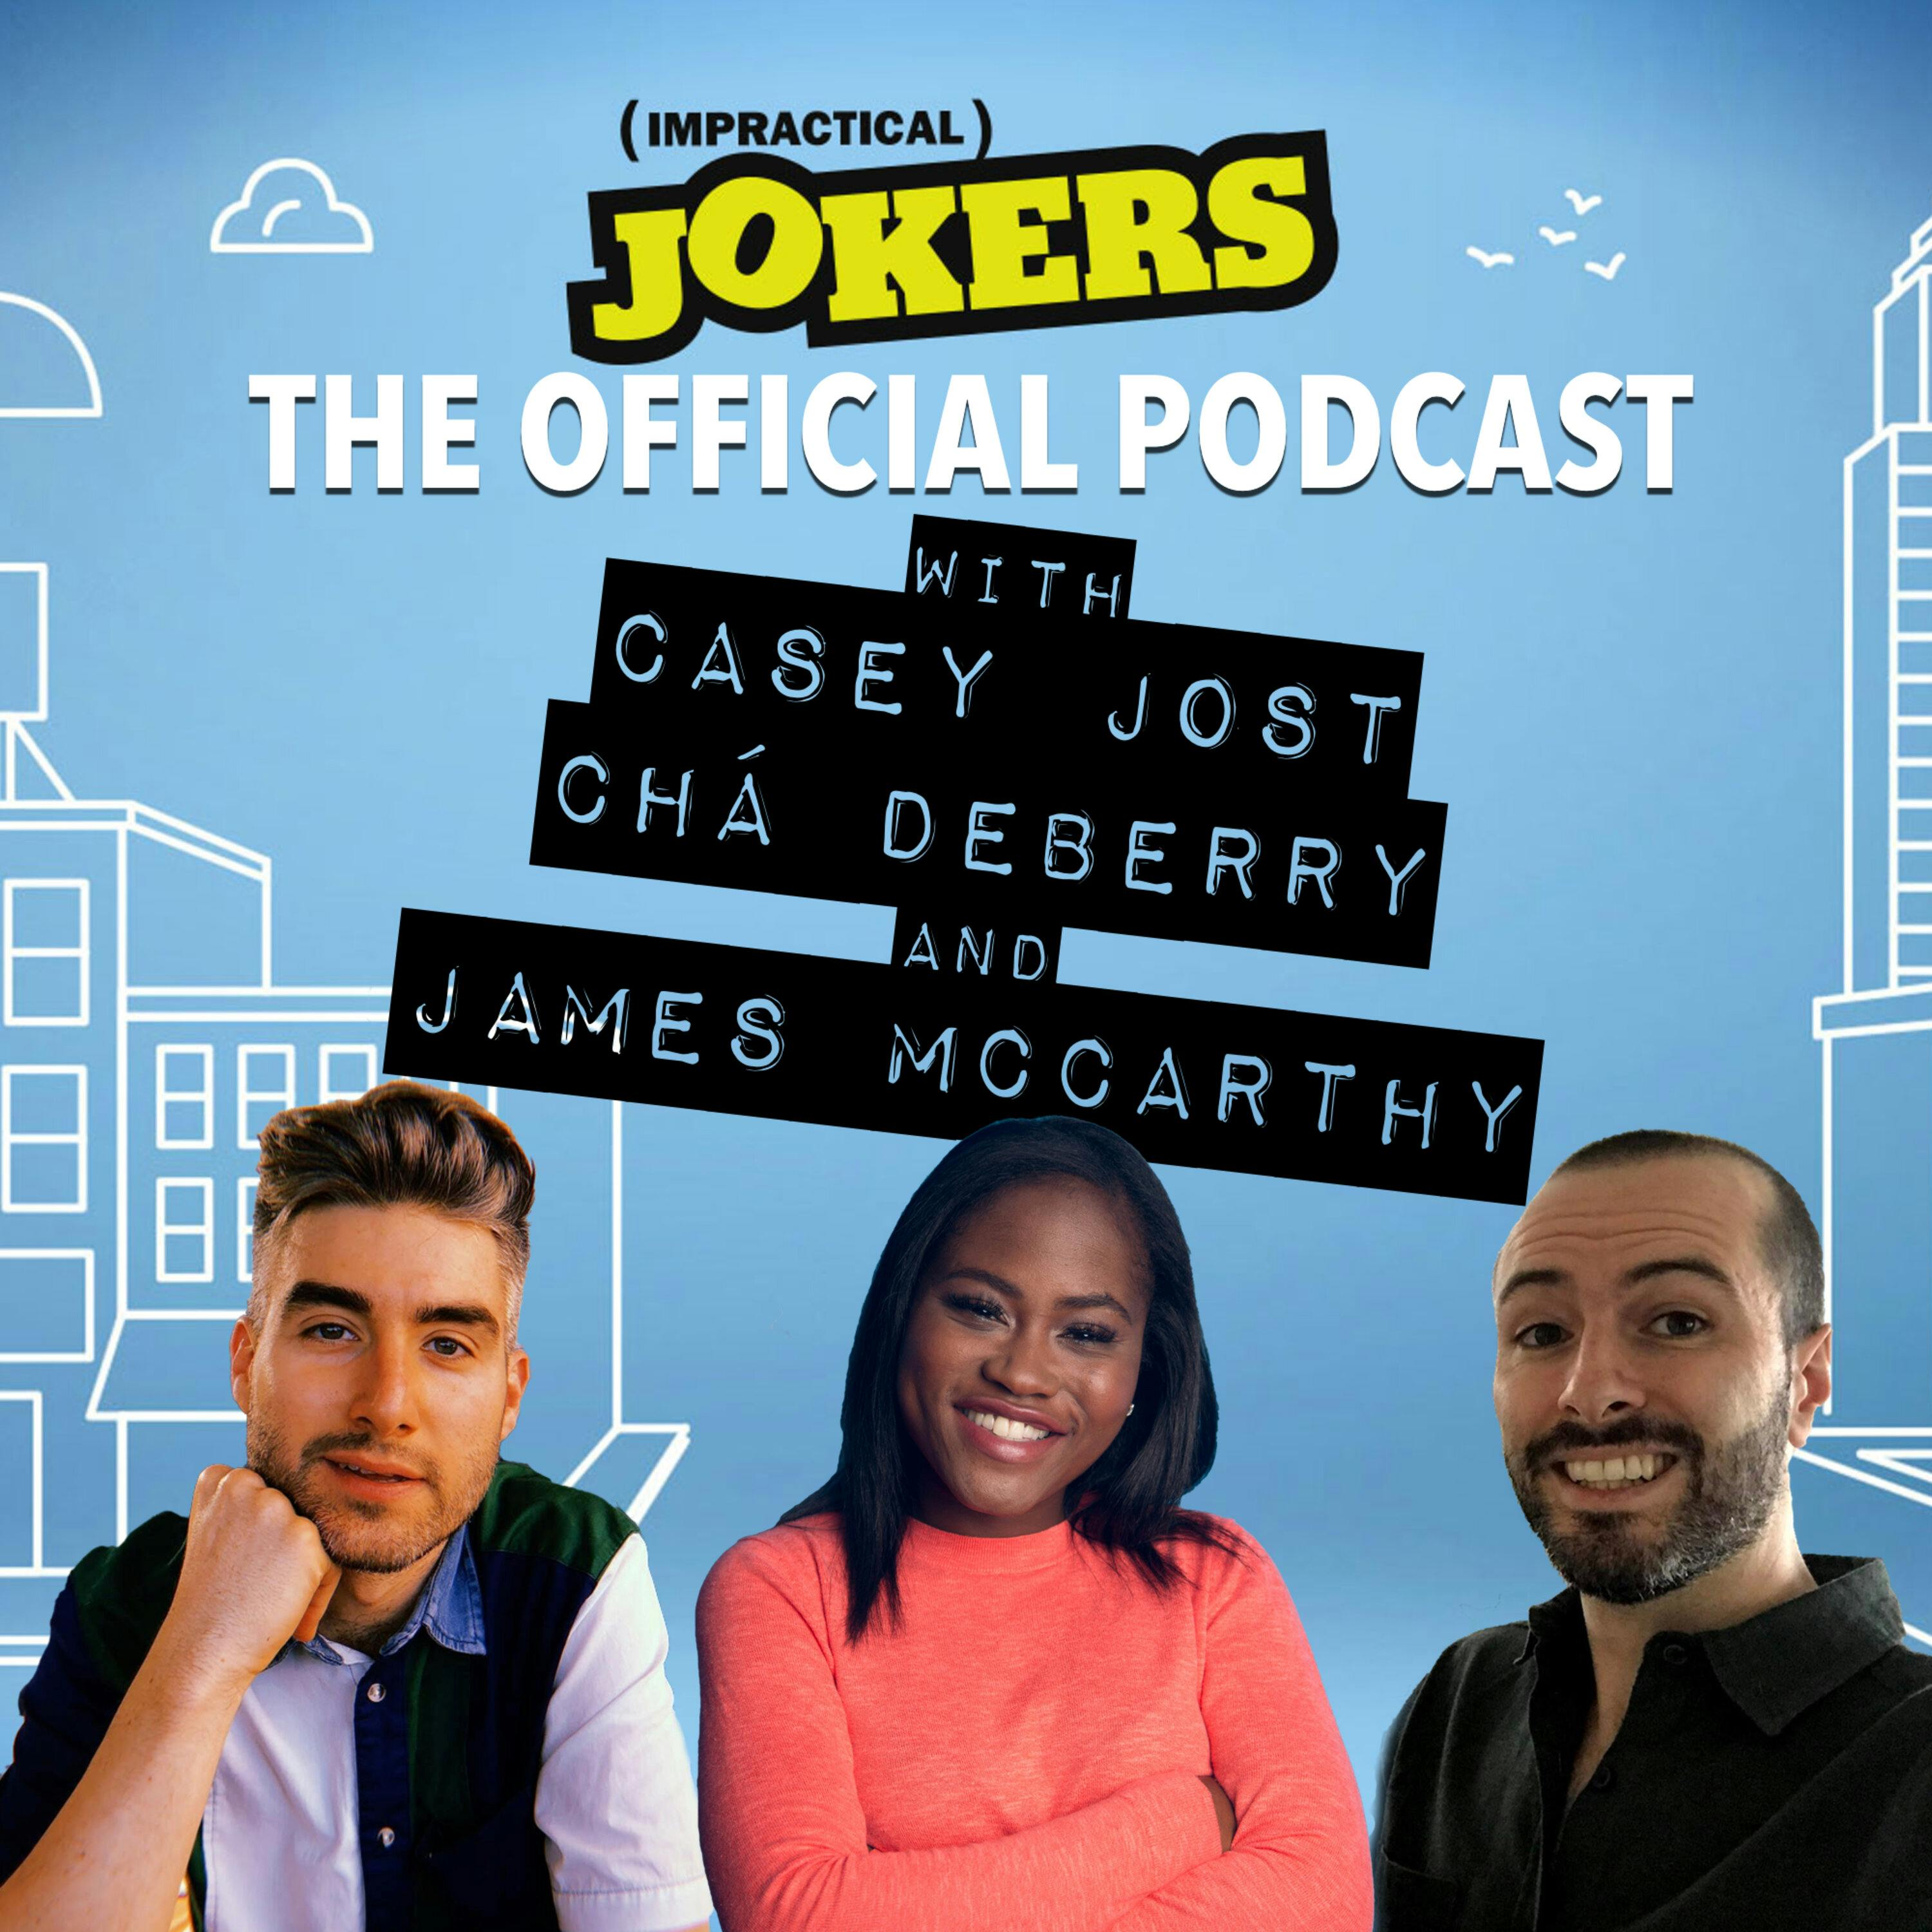 Introducing The Official Impractical Jokers Podcast